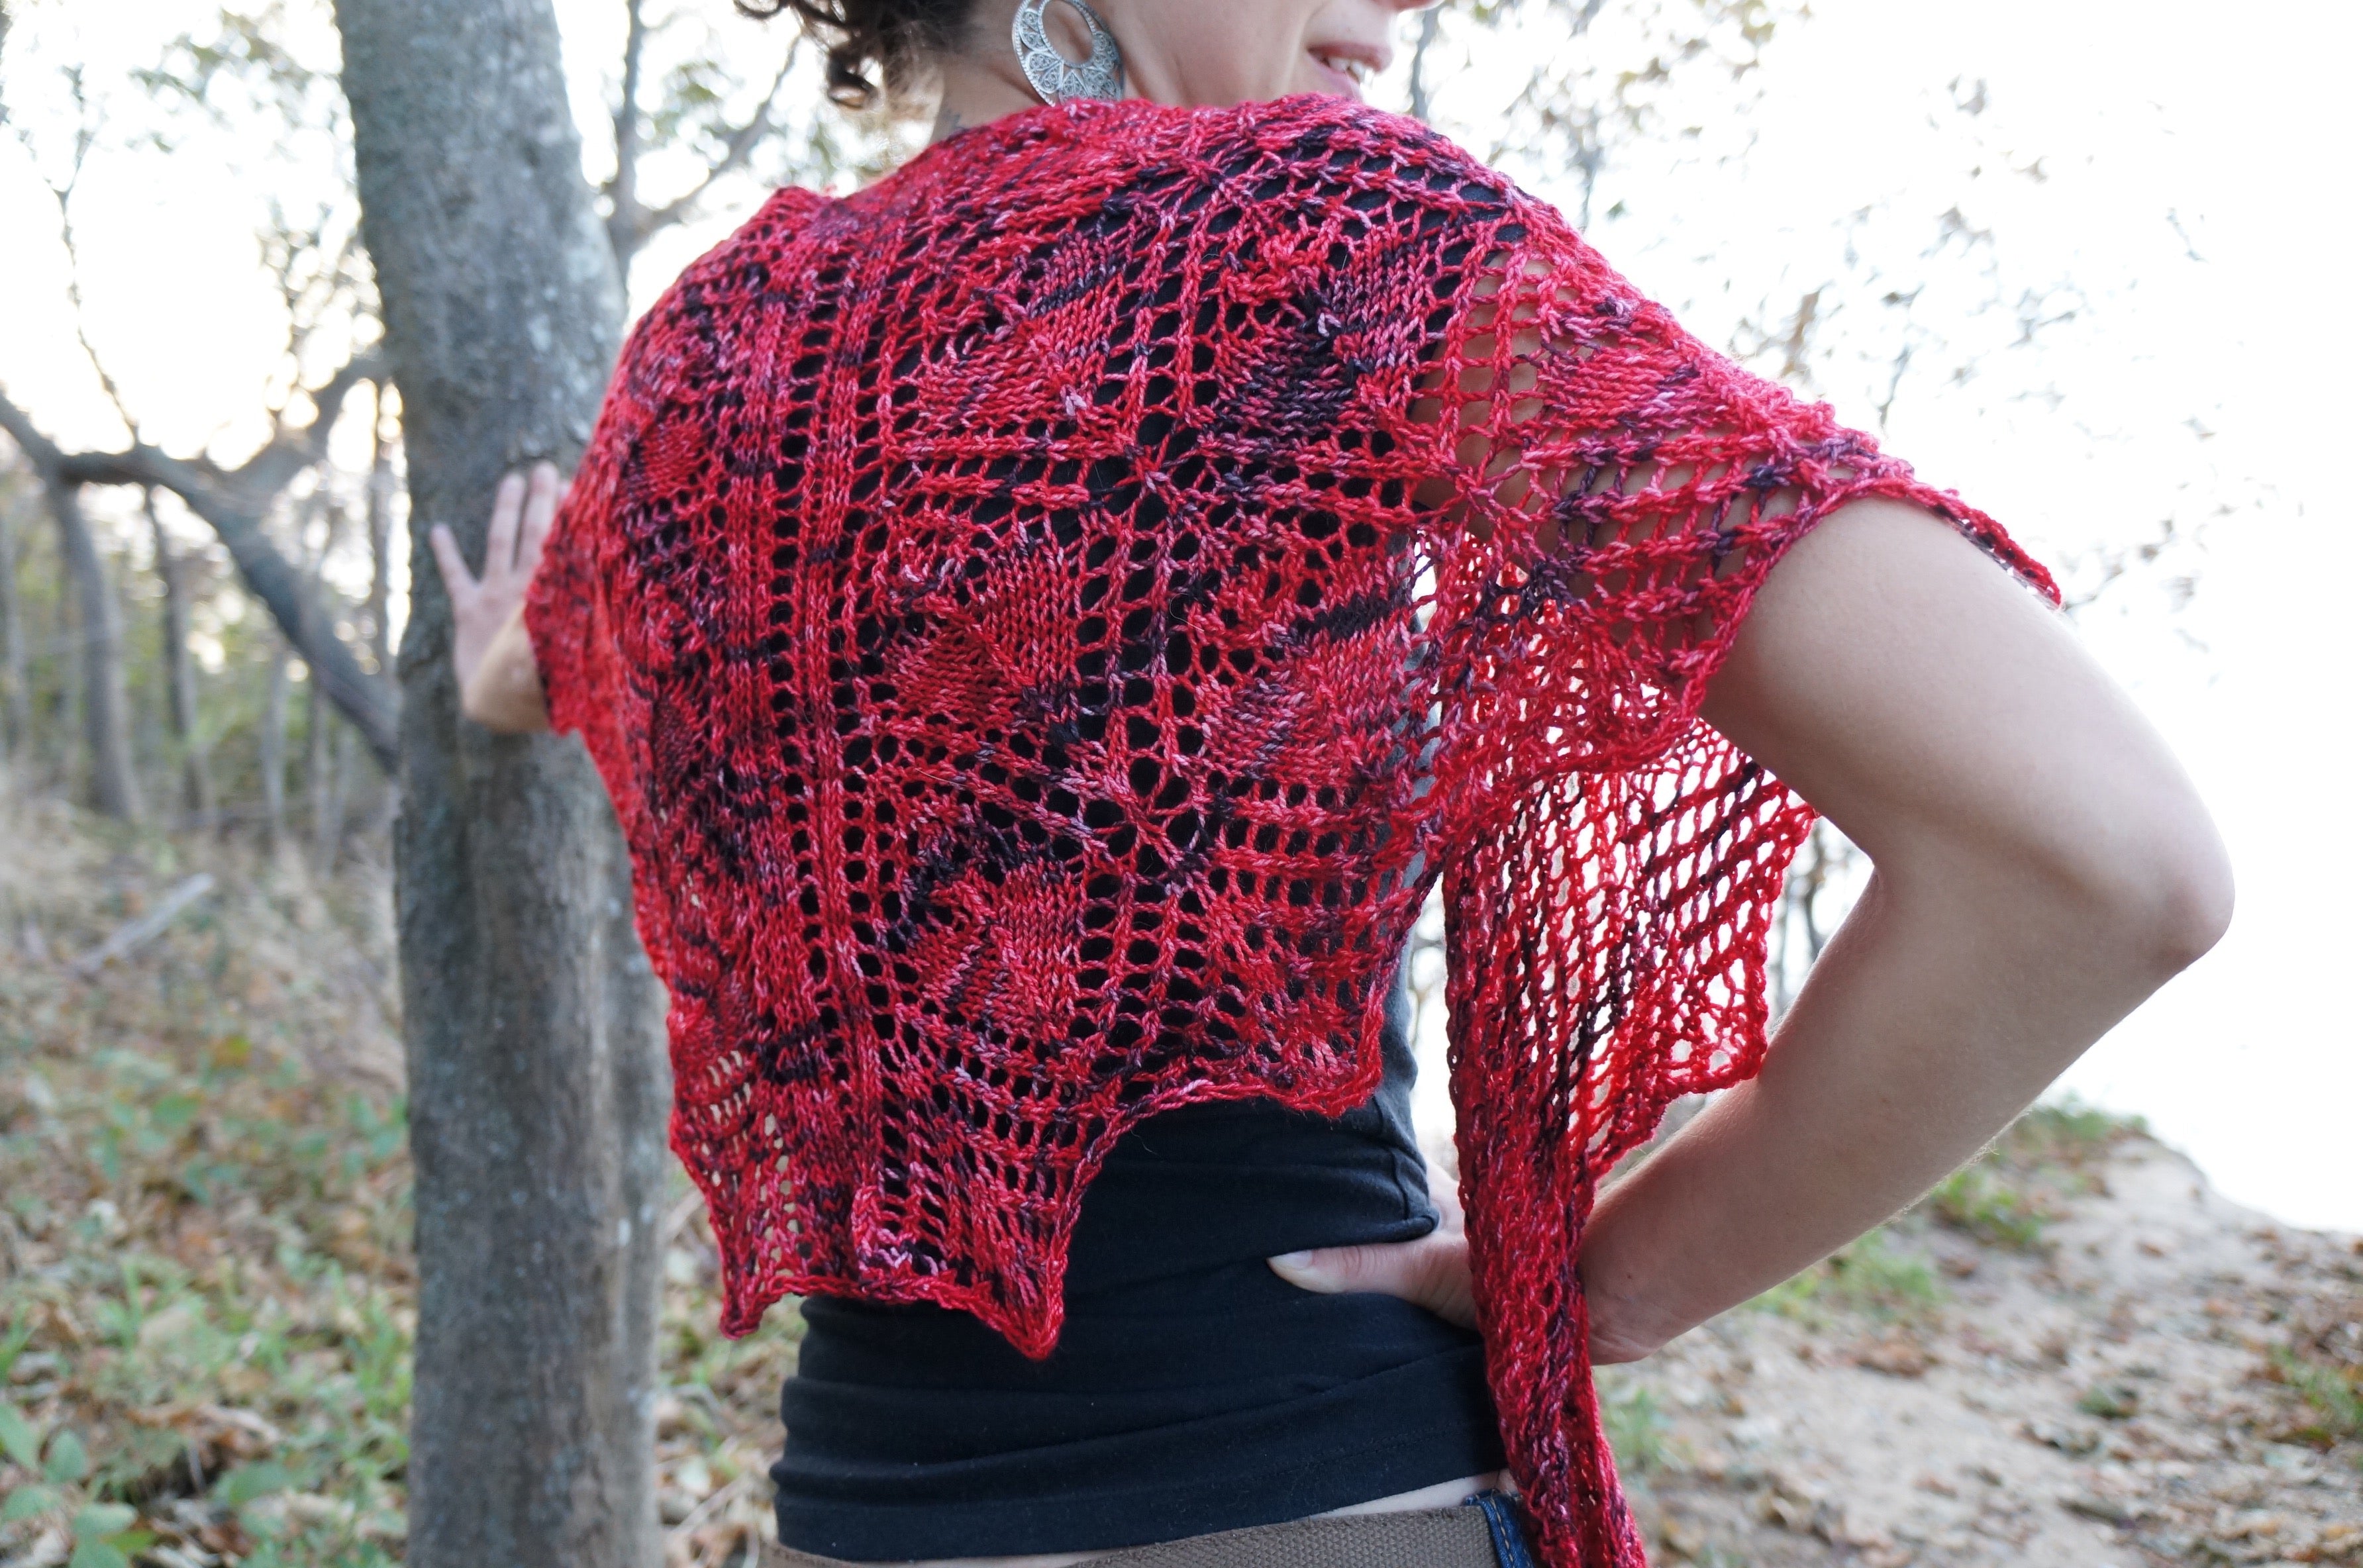 Red Queen Shawl - Fiddle Knits Designs